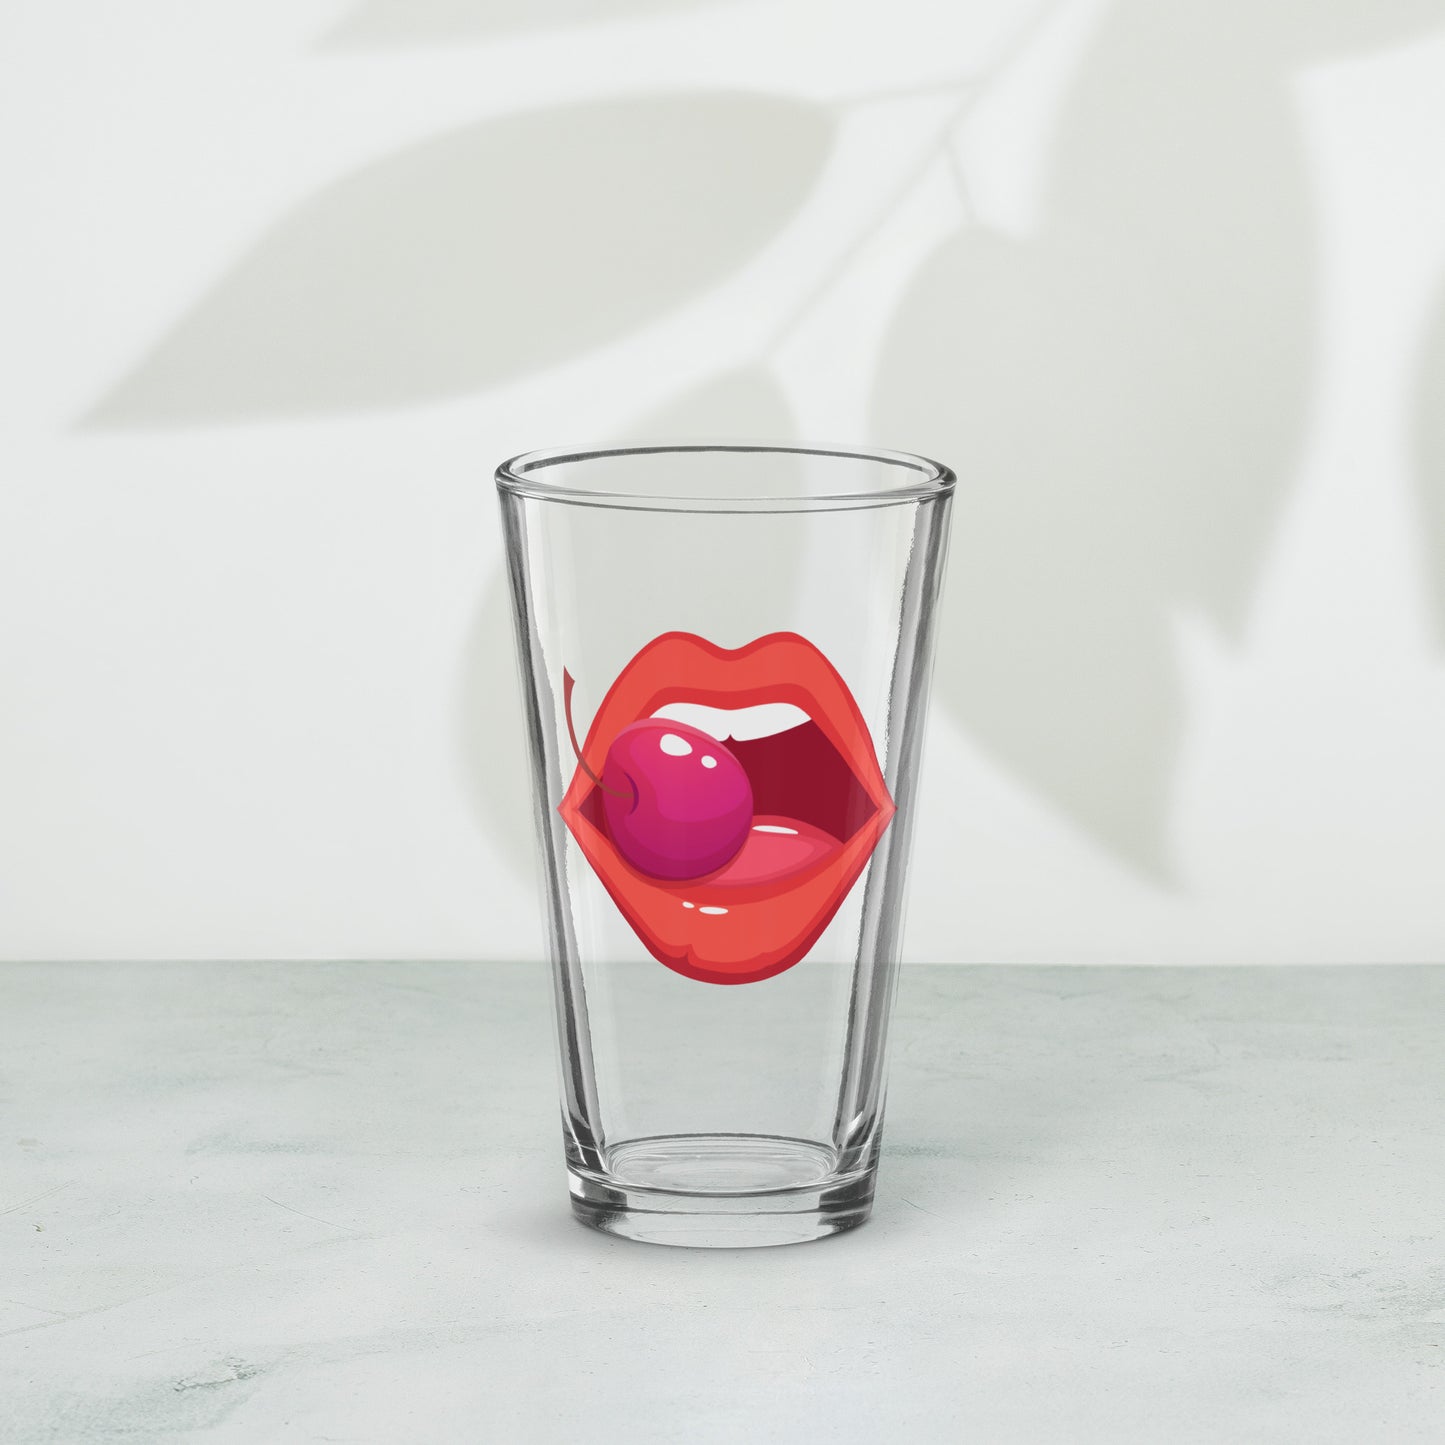 Shaker Pint Glass: Vivid Red Mouth & Cherry